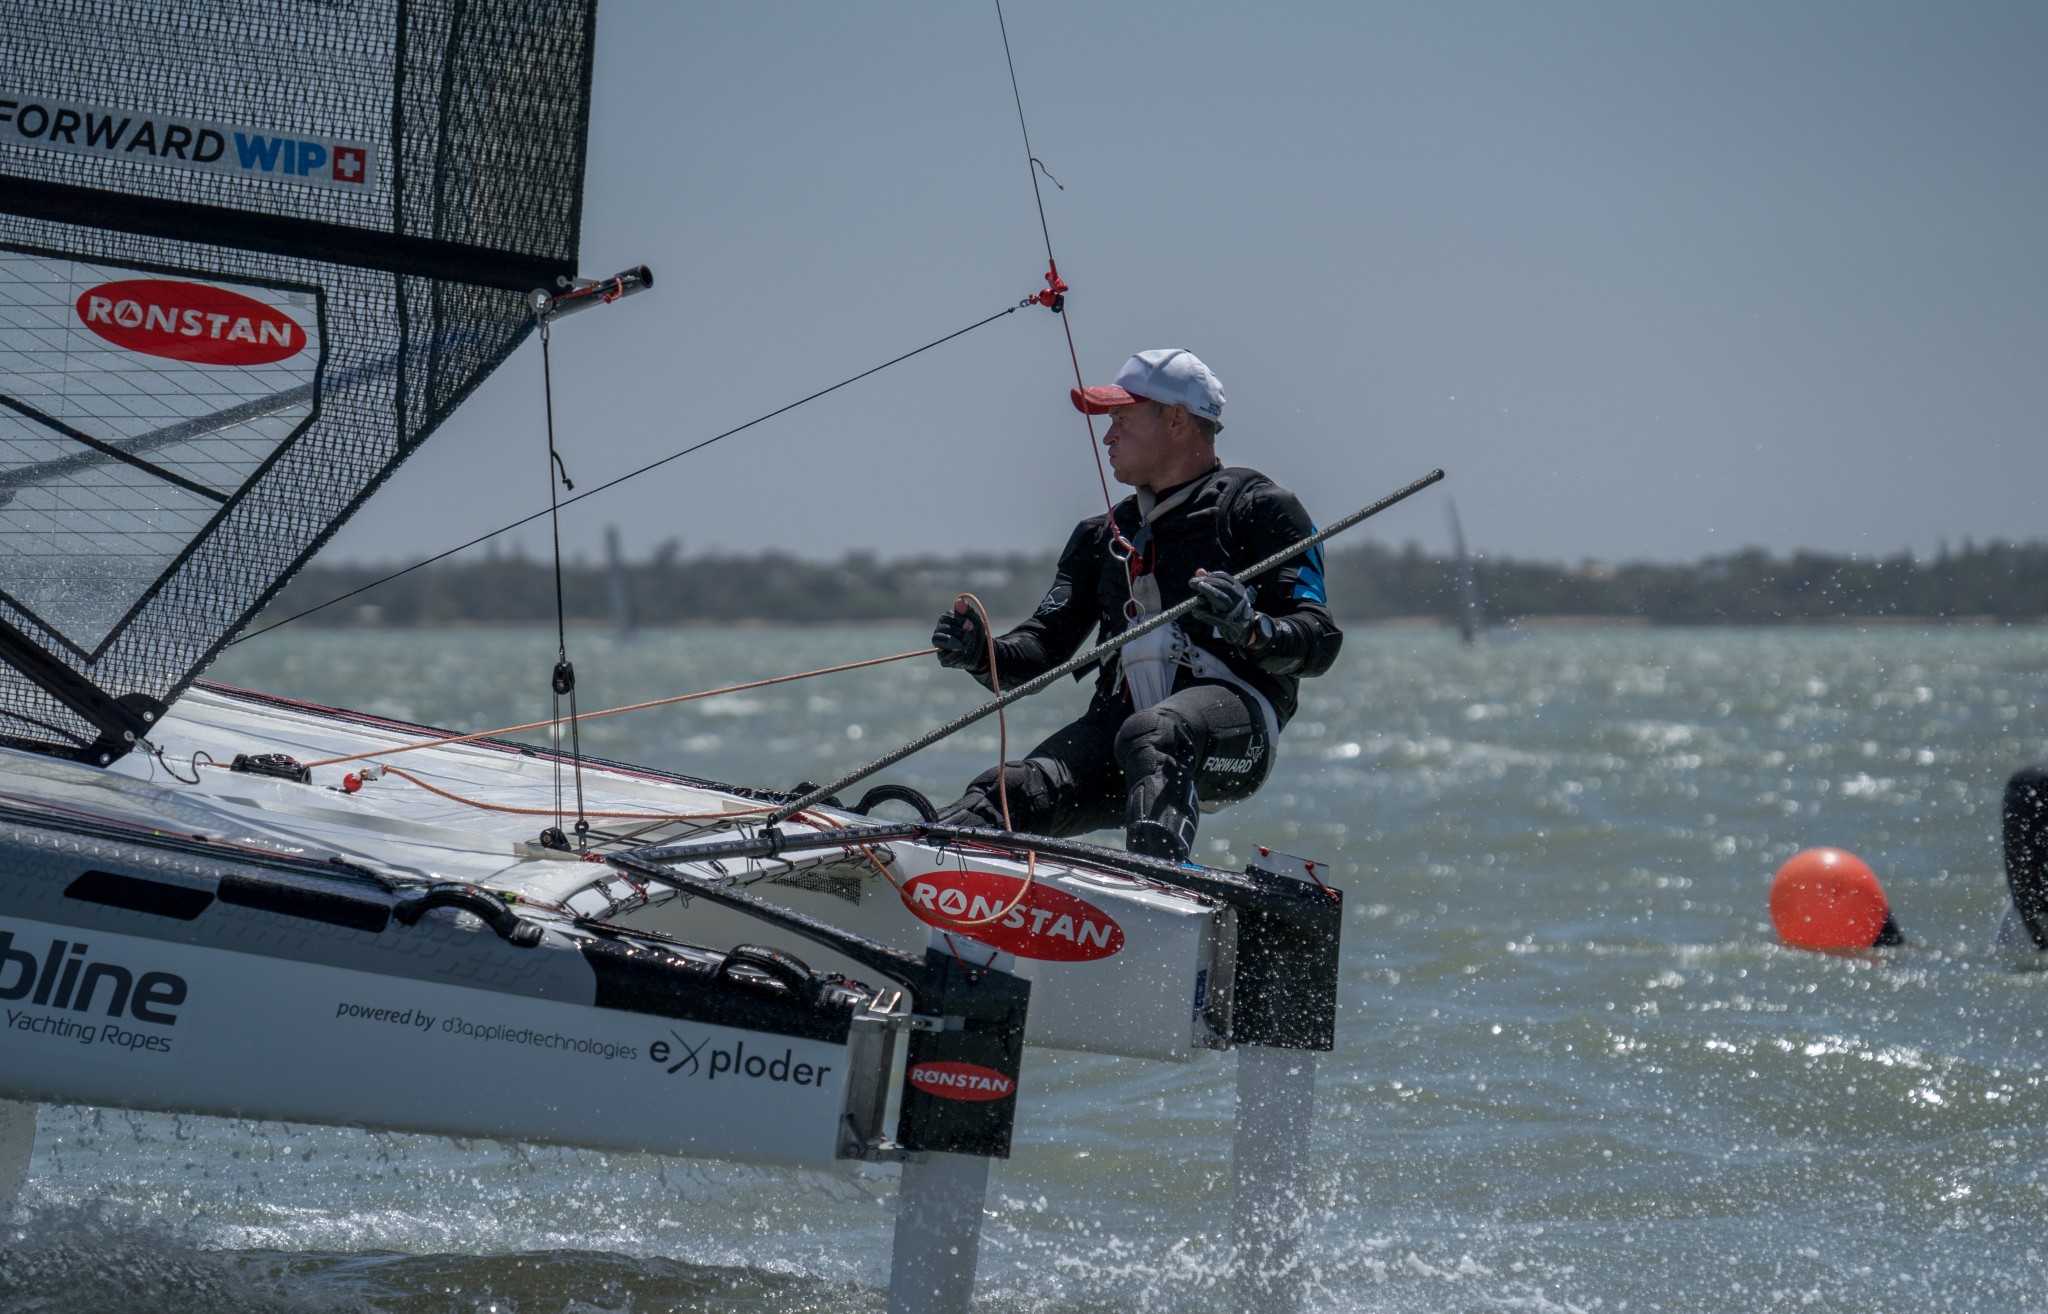 ashby-aces-a-class-catamaran-world-champs-for-the-10th-time